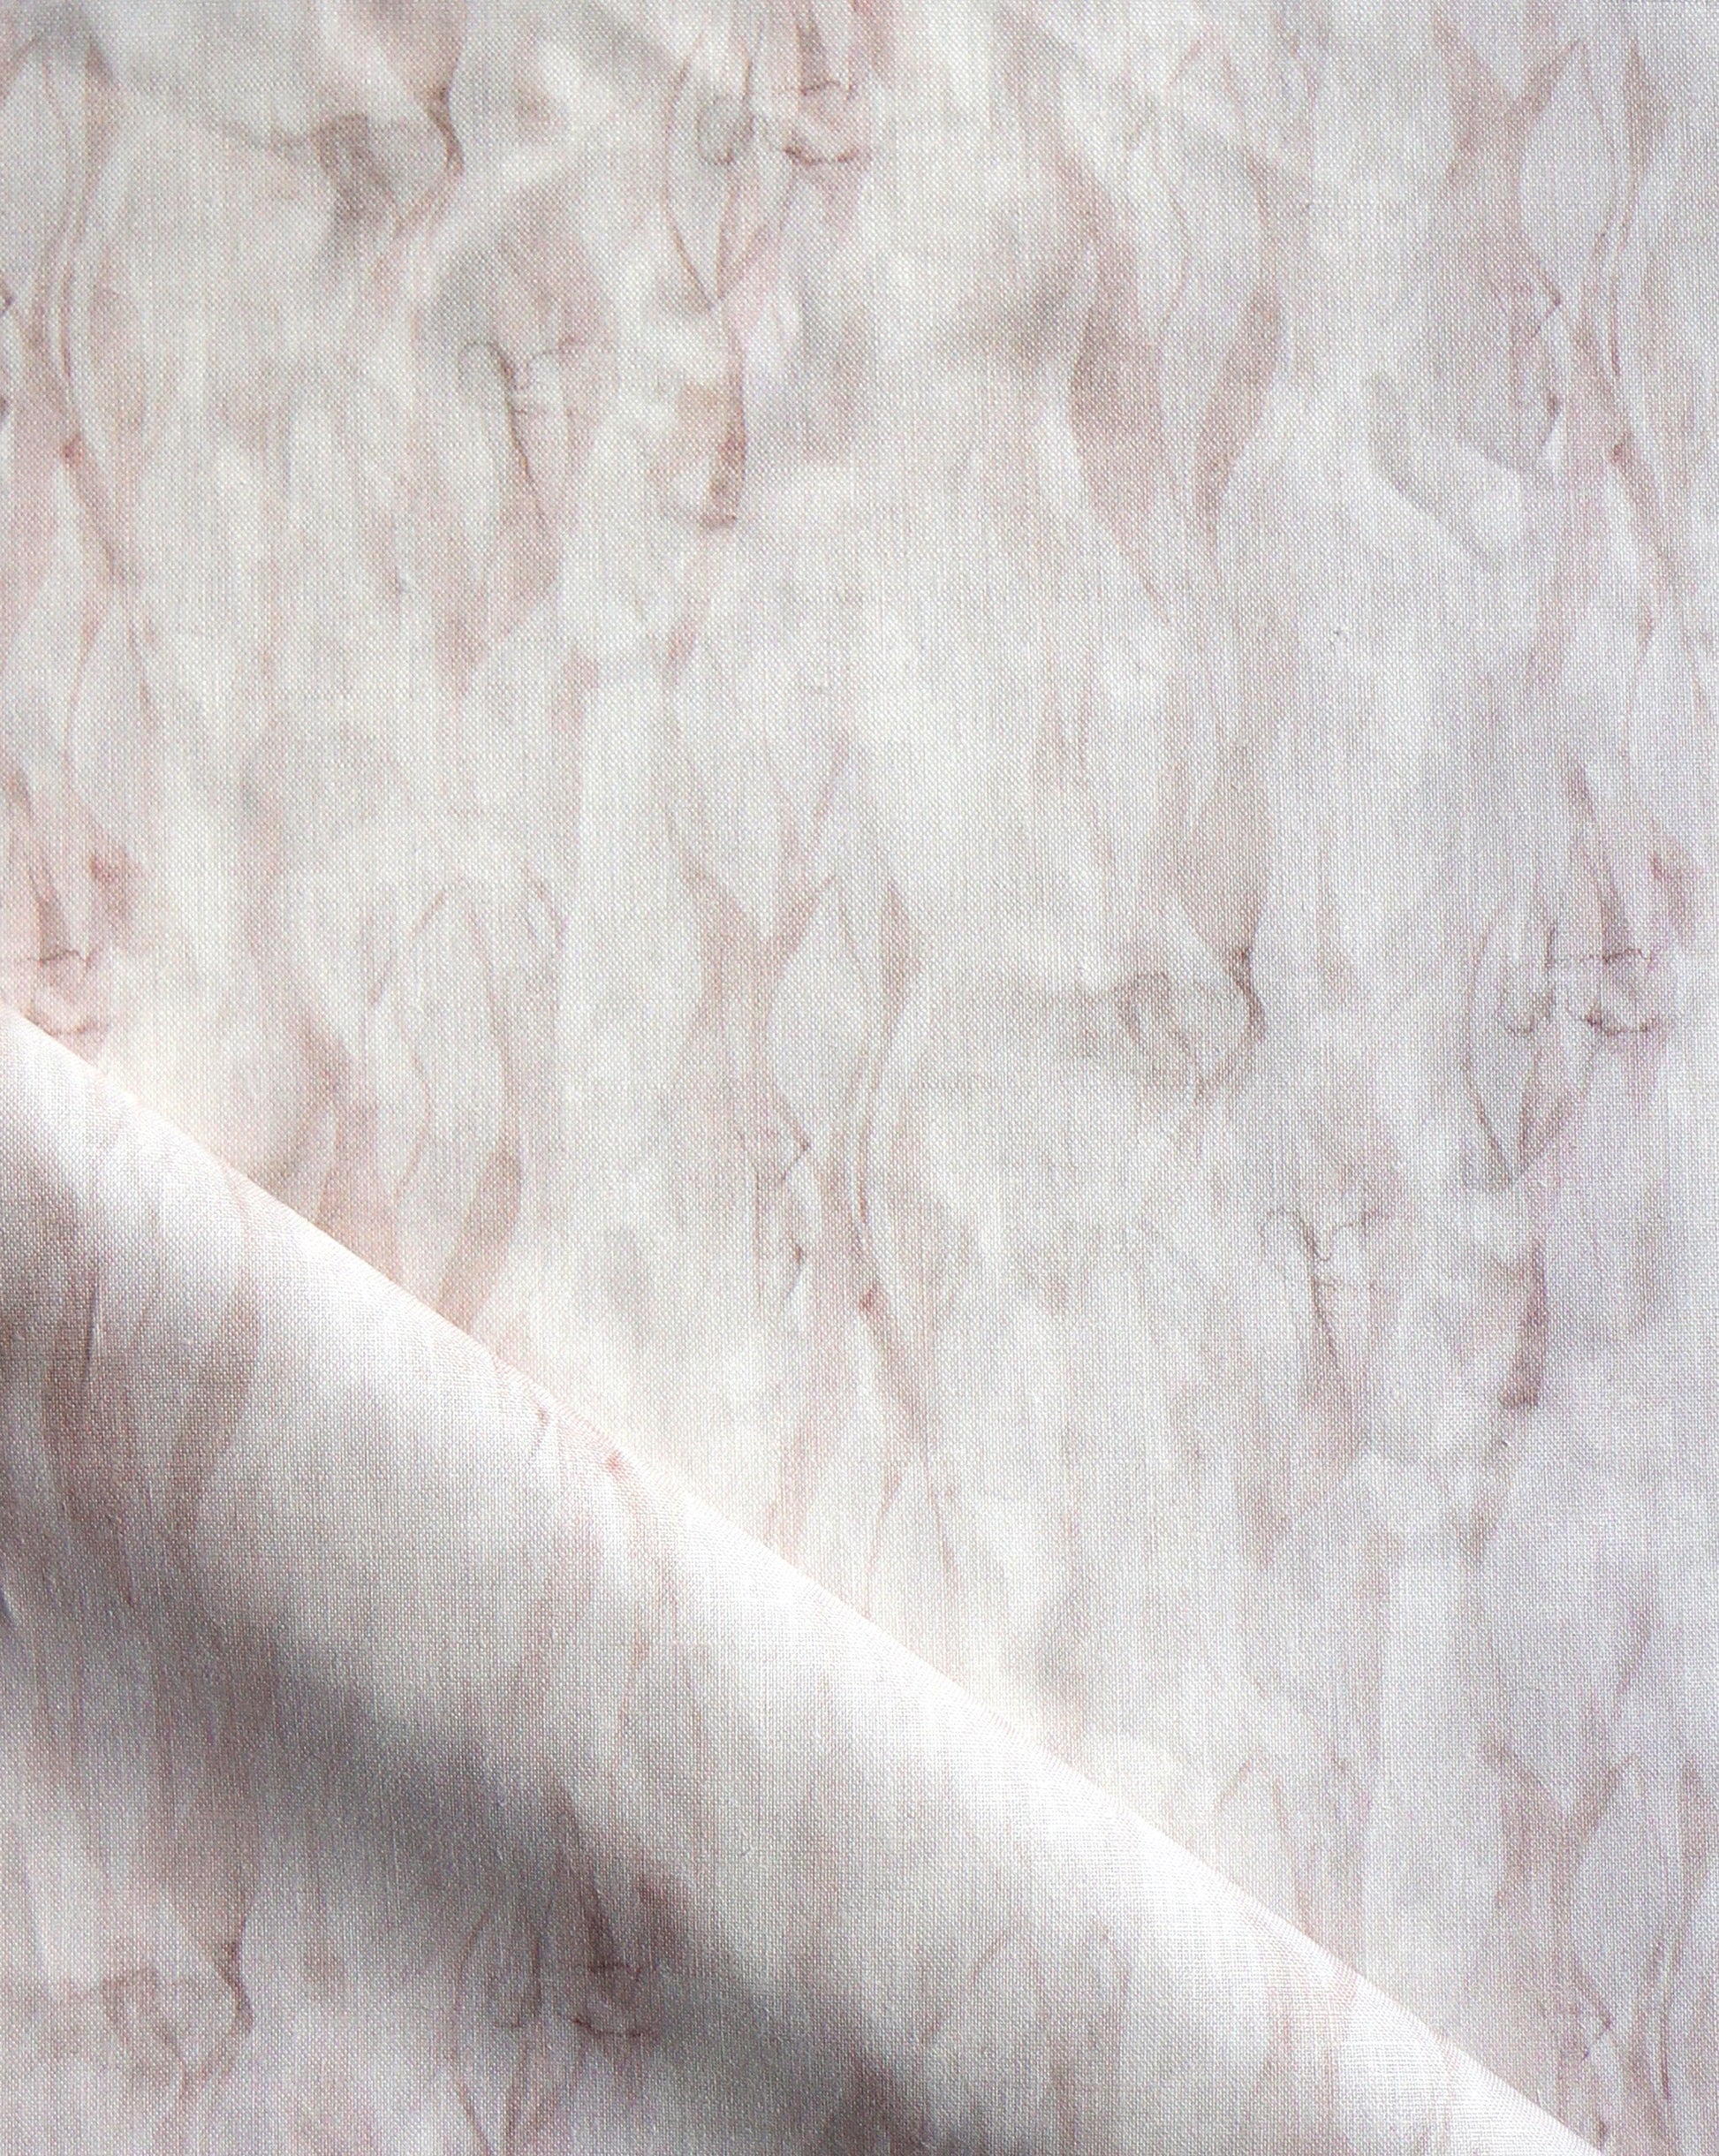 Cascade in Quartz is an Eskayel print for fabric featuring watercolor brushstrokes in pink and beige.